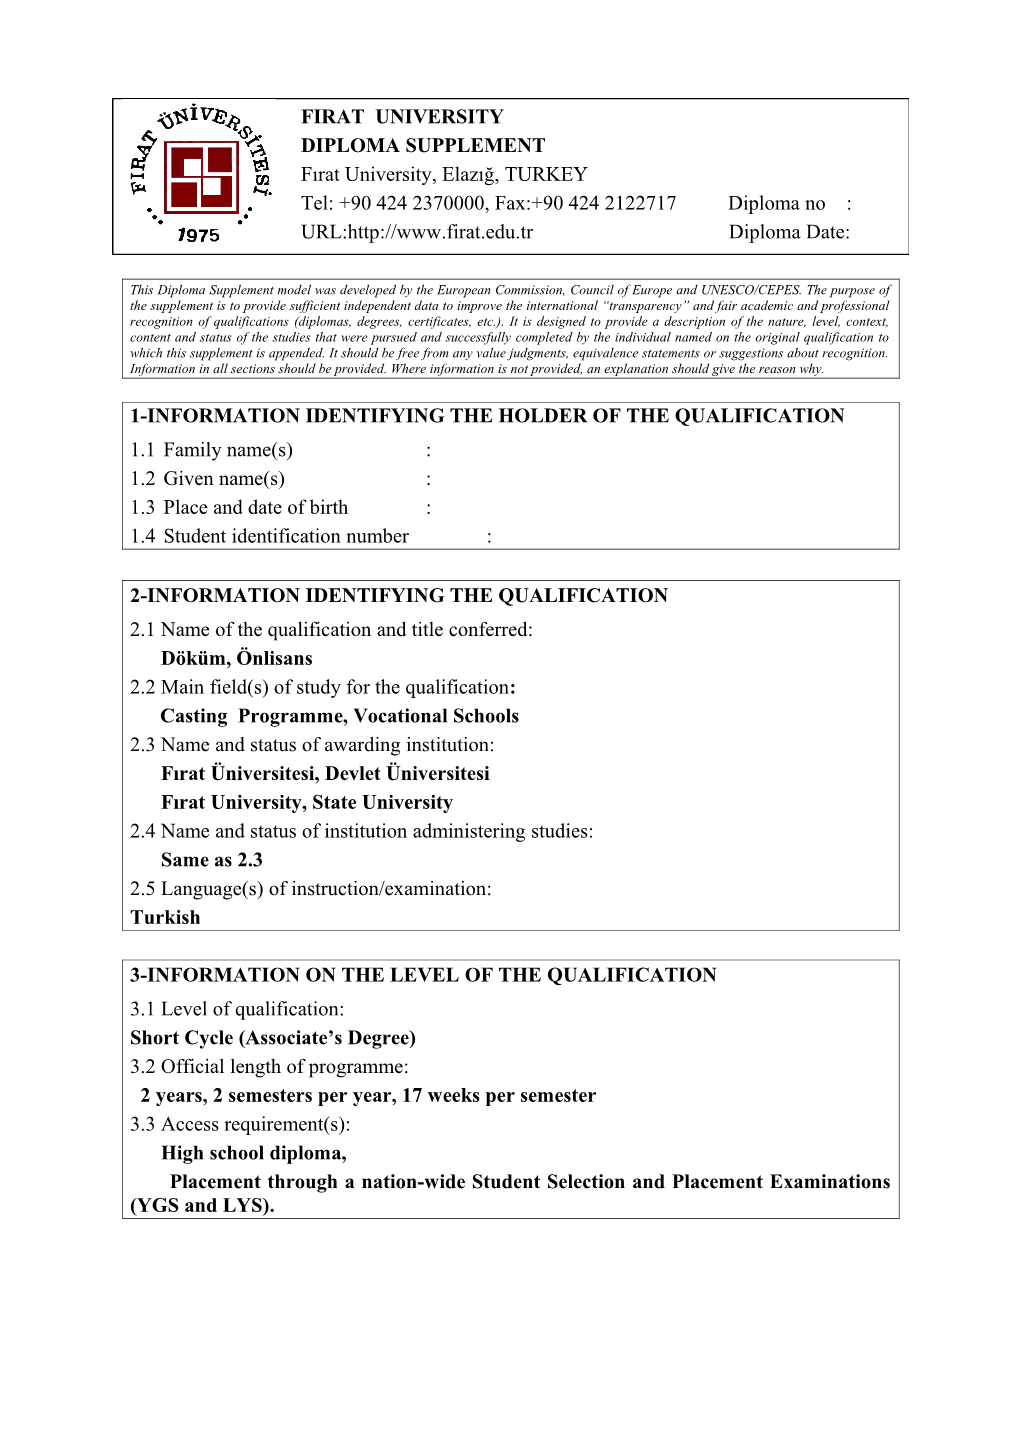 1-Information Identifying the Holder of the Qualification